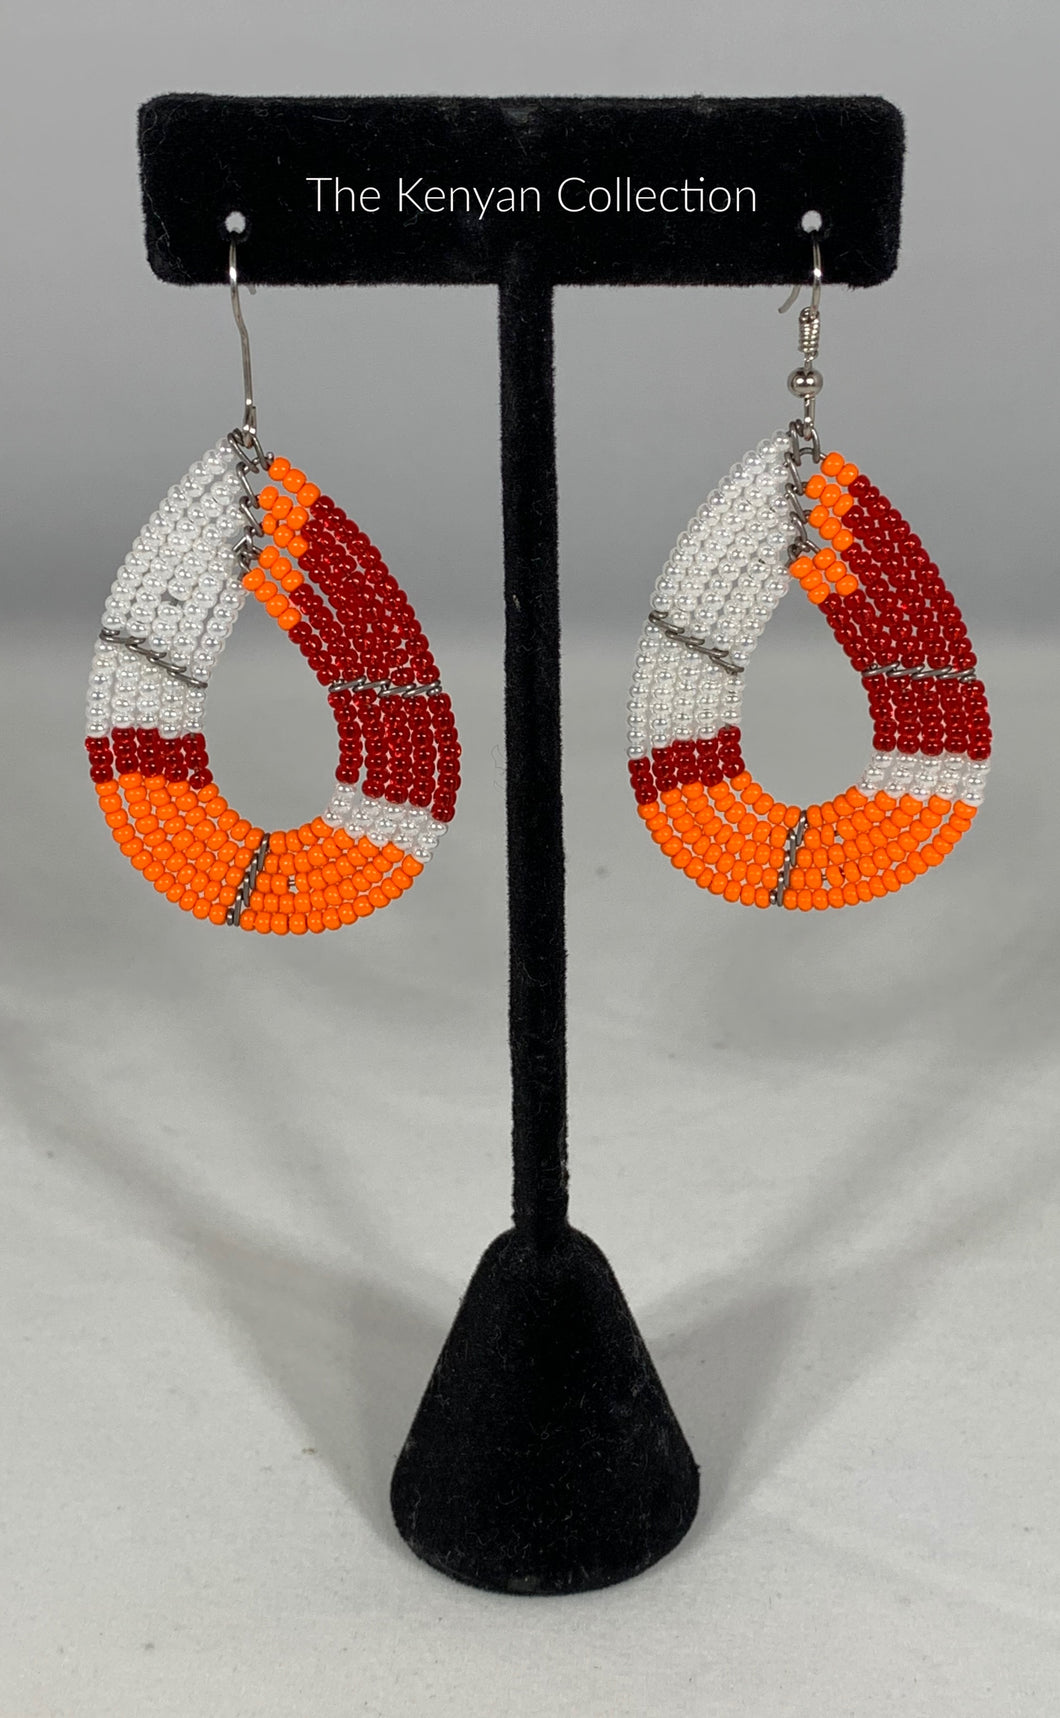 Earrings in Peacock Orange and Reds